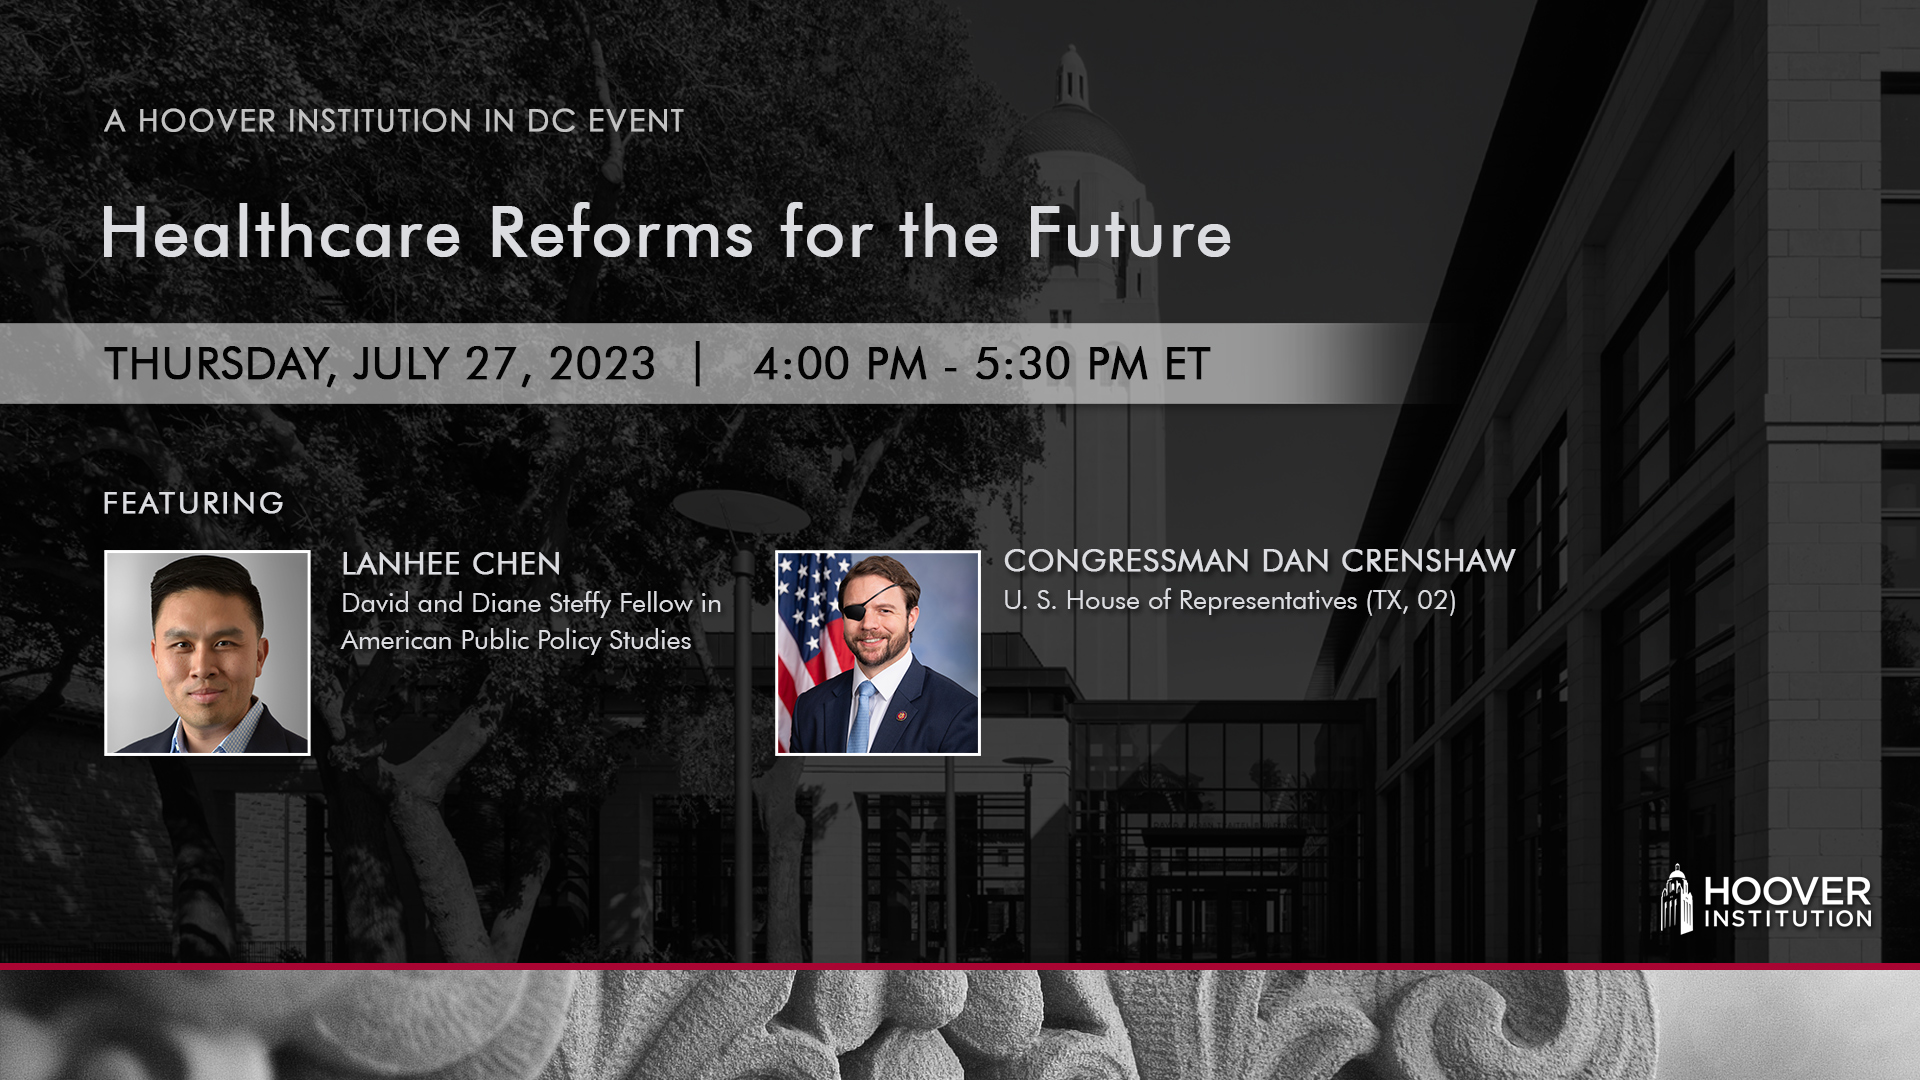 Healthcare Reforms for the Future - July 27, 2023